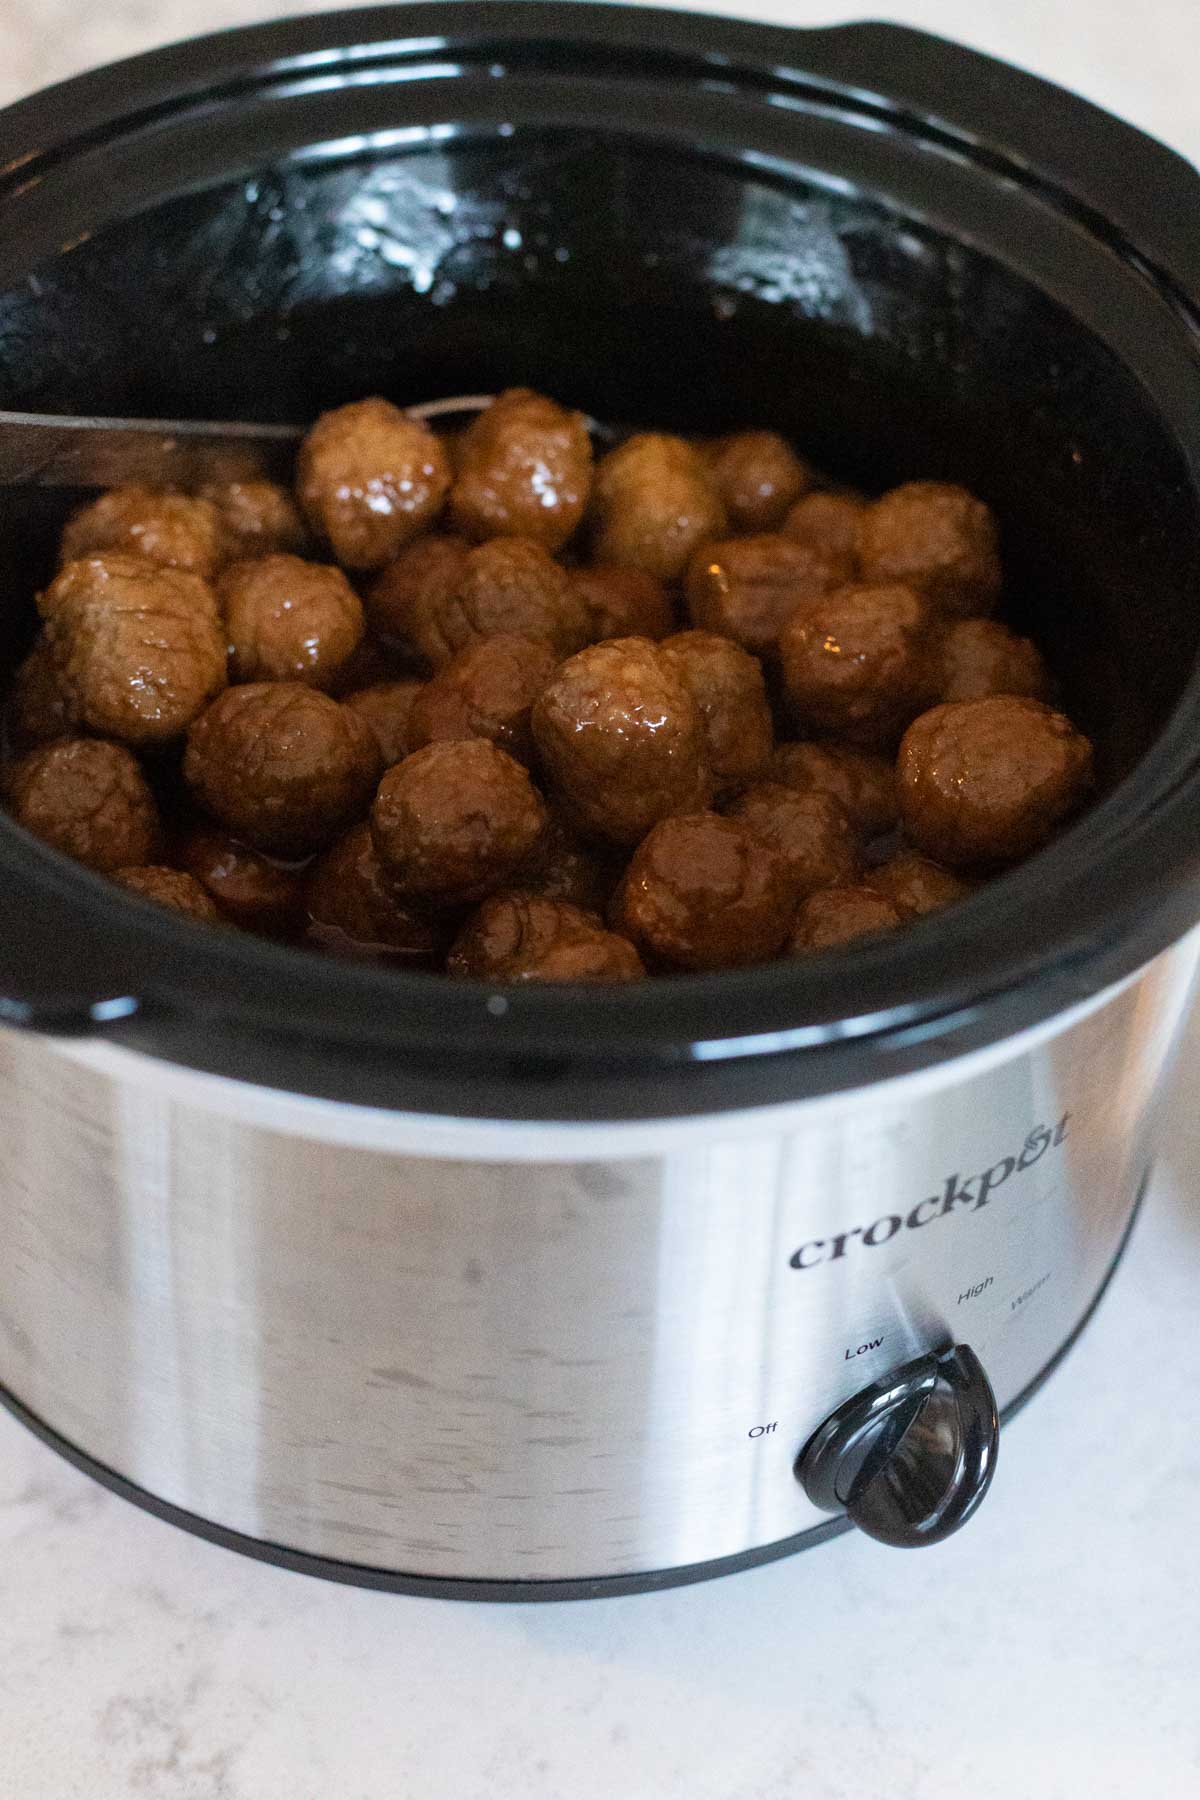 The sweet and sour sauce has been stirred over the meatballs in the Crockpot.